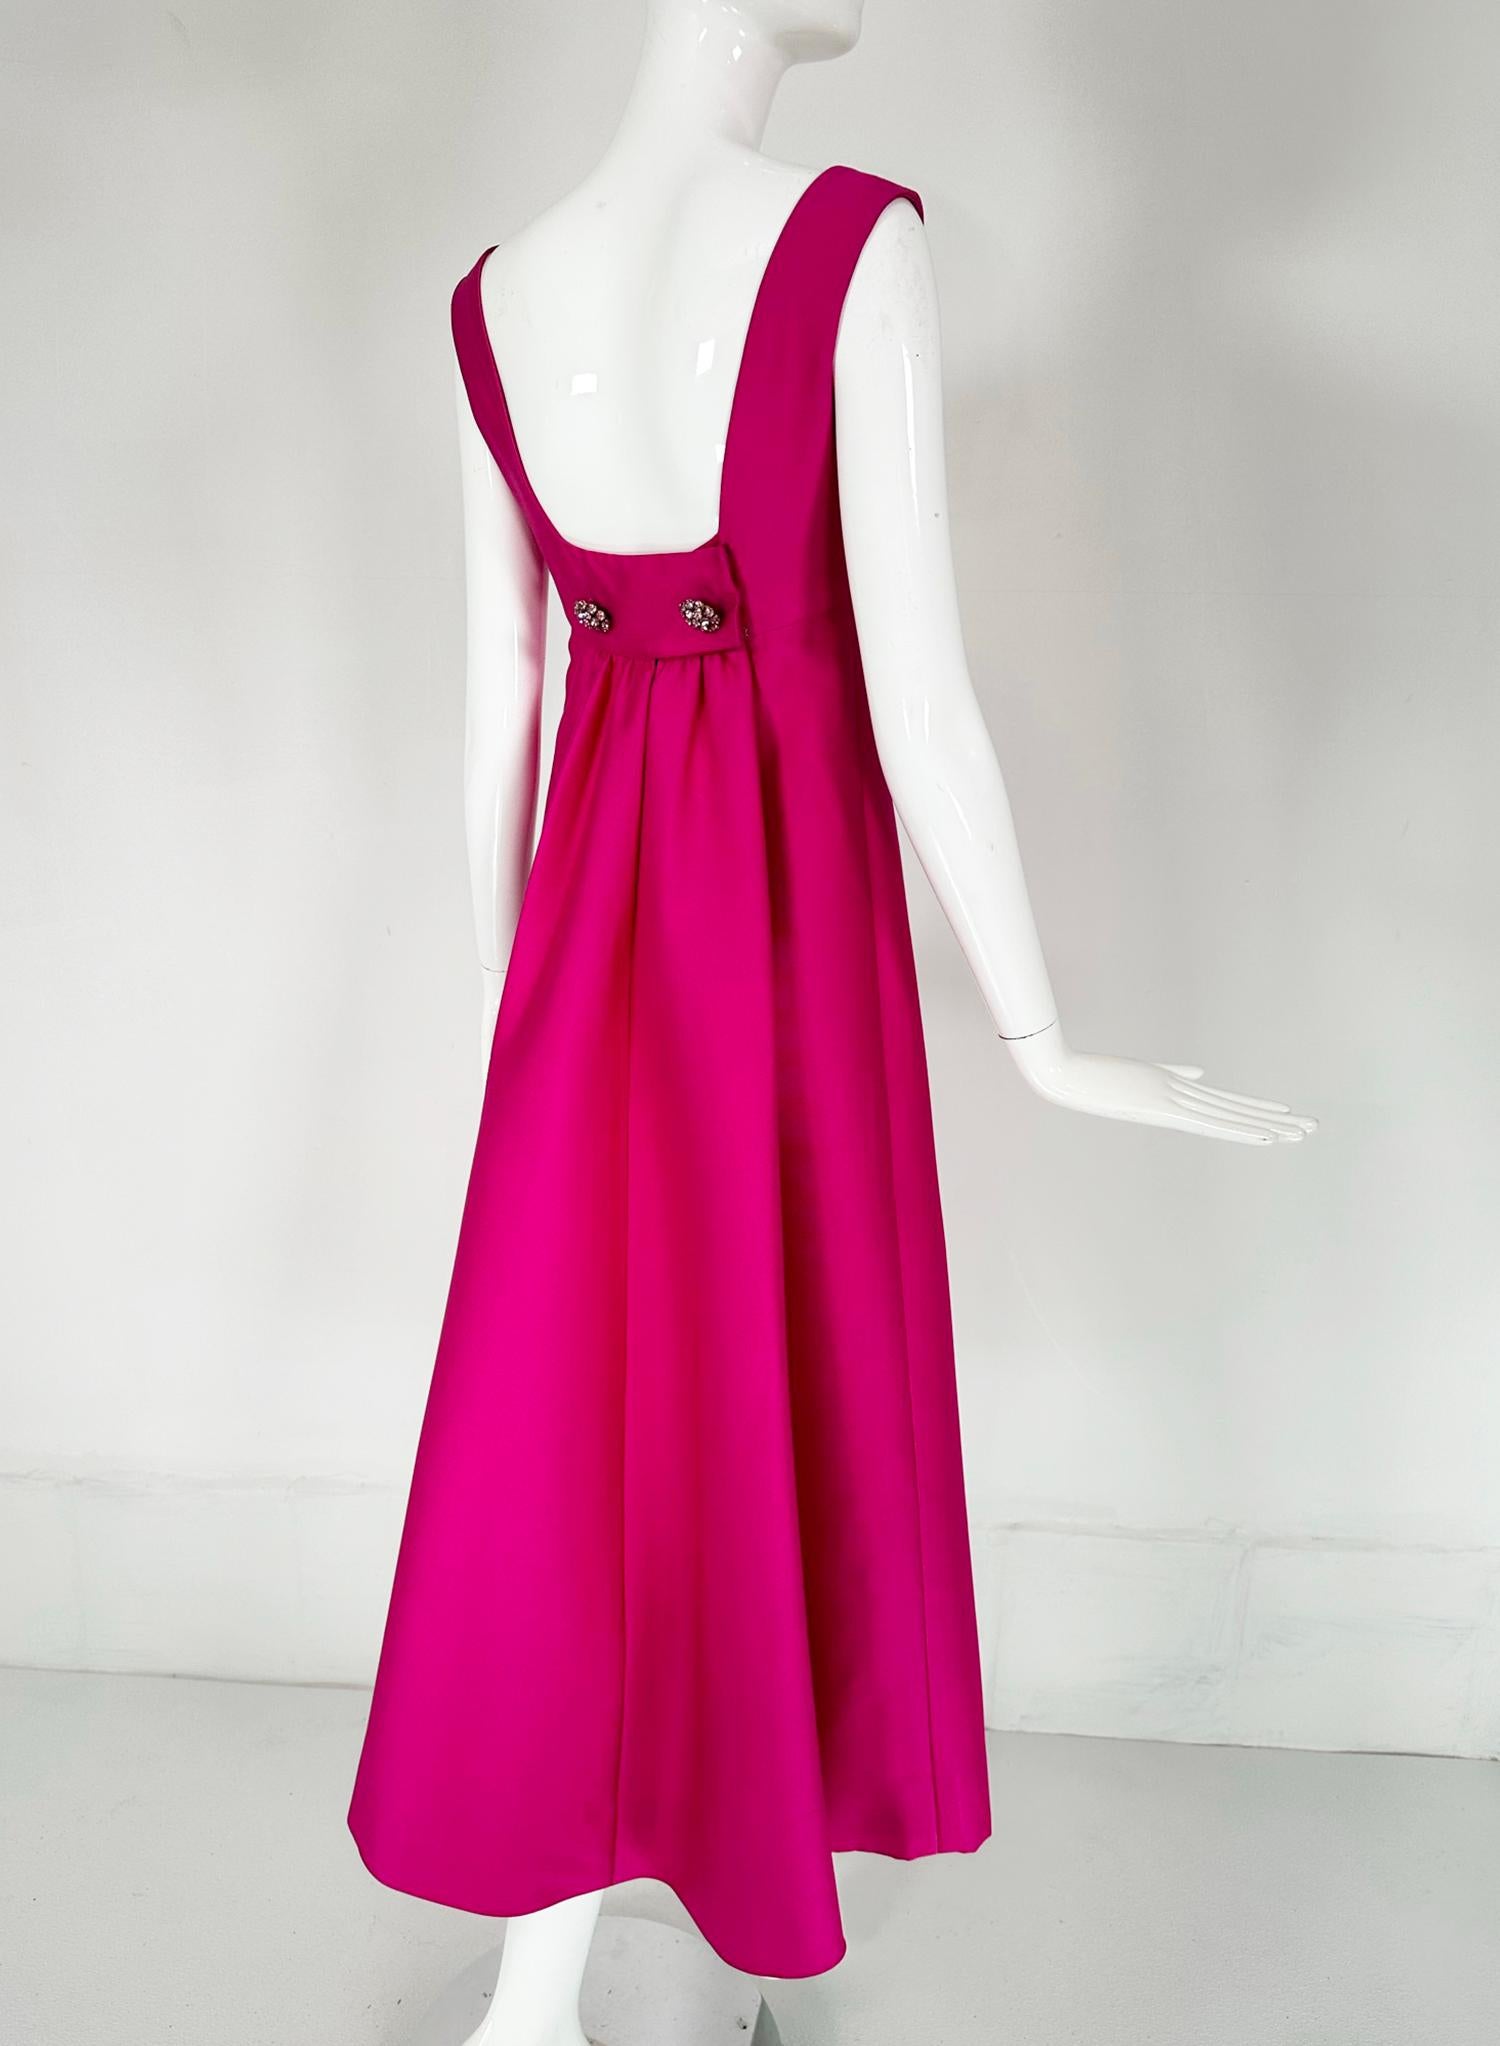 Malcolm Starr Fuchsia Pink Silk Twill Evening Dress Early 1960s For Sale 1